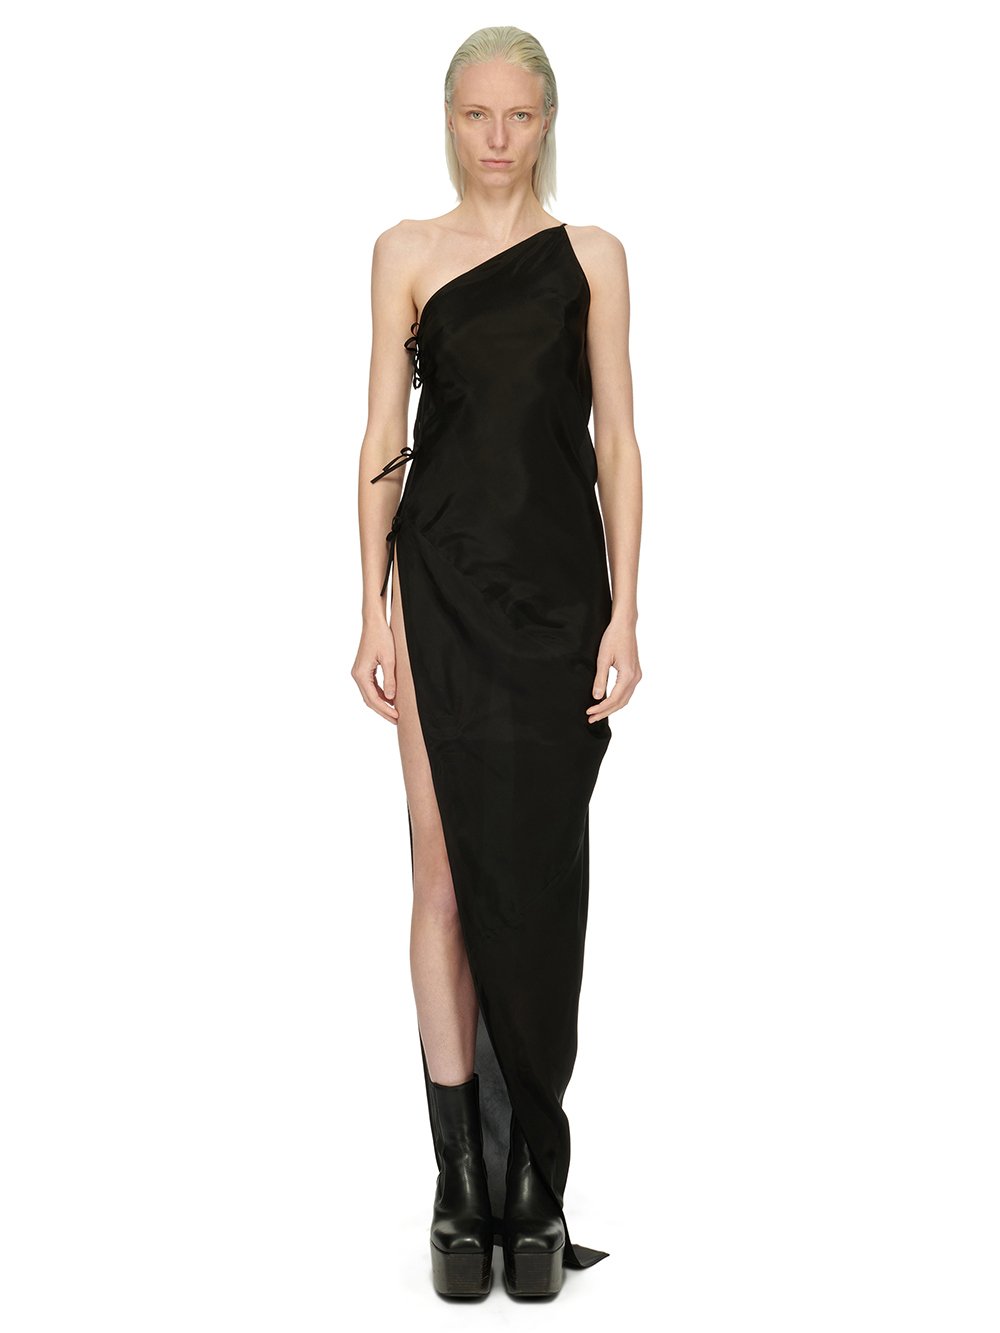 RICK OWENS FW23 LUXOR TACO GOWN IN BLACK CUPRO JAPONETTE